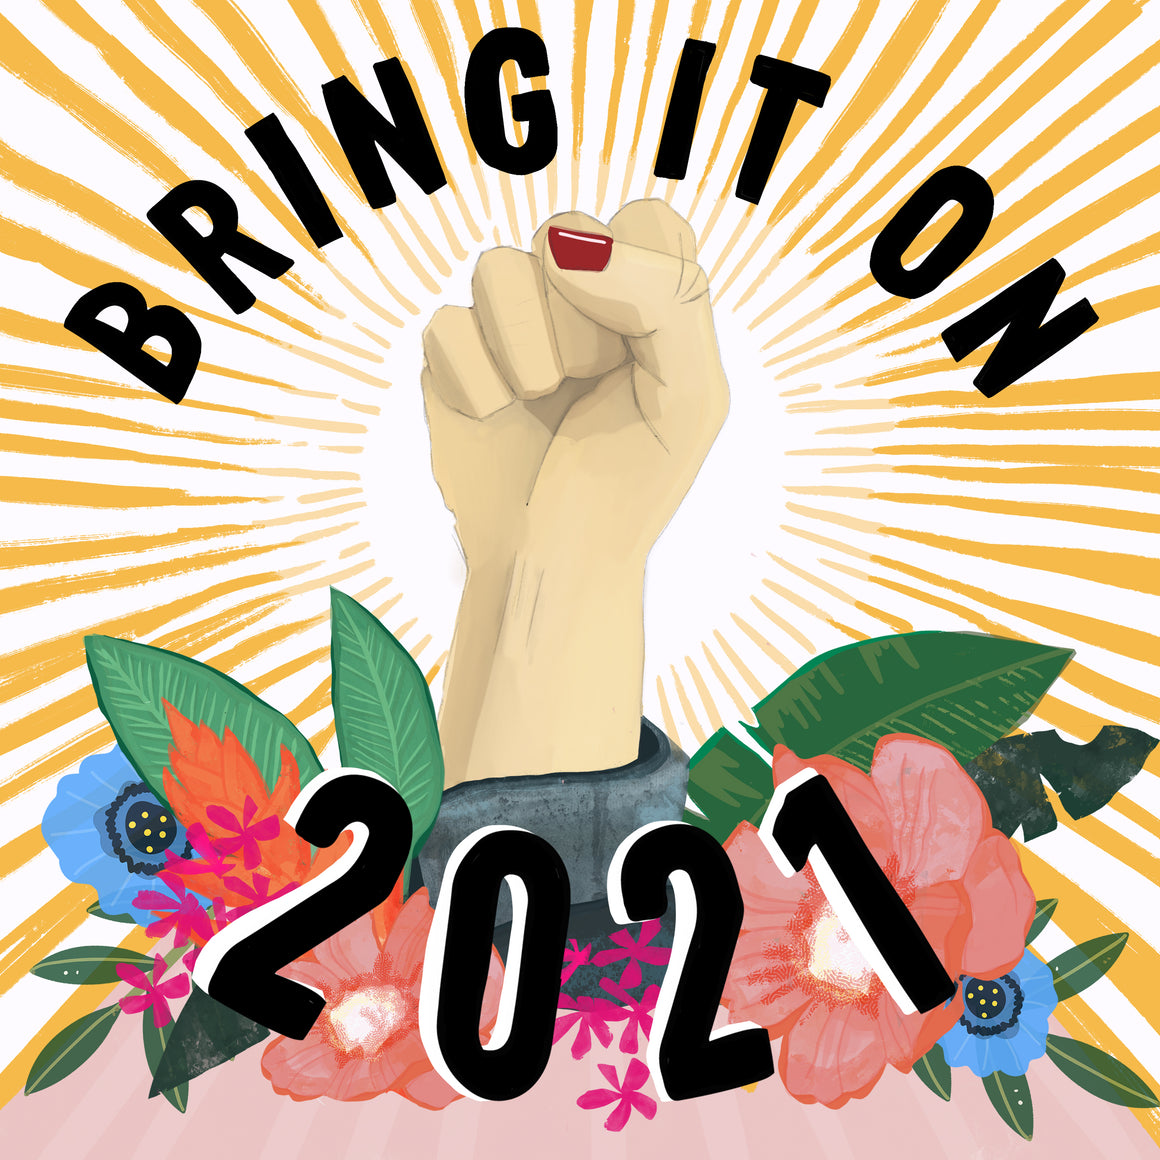 'BRING IT ON 2021' A5 or A4 Print - FREE DOWNLOAD